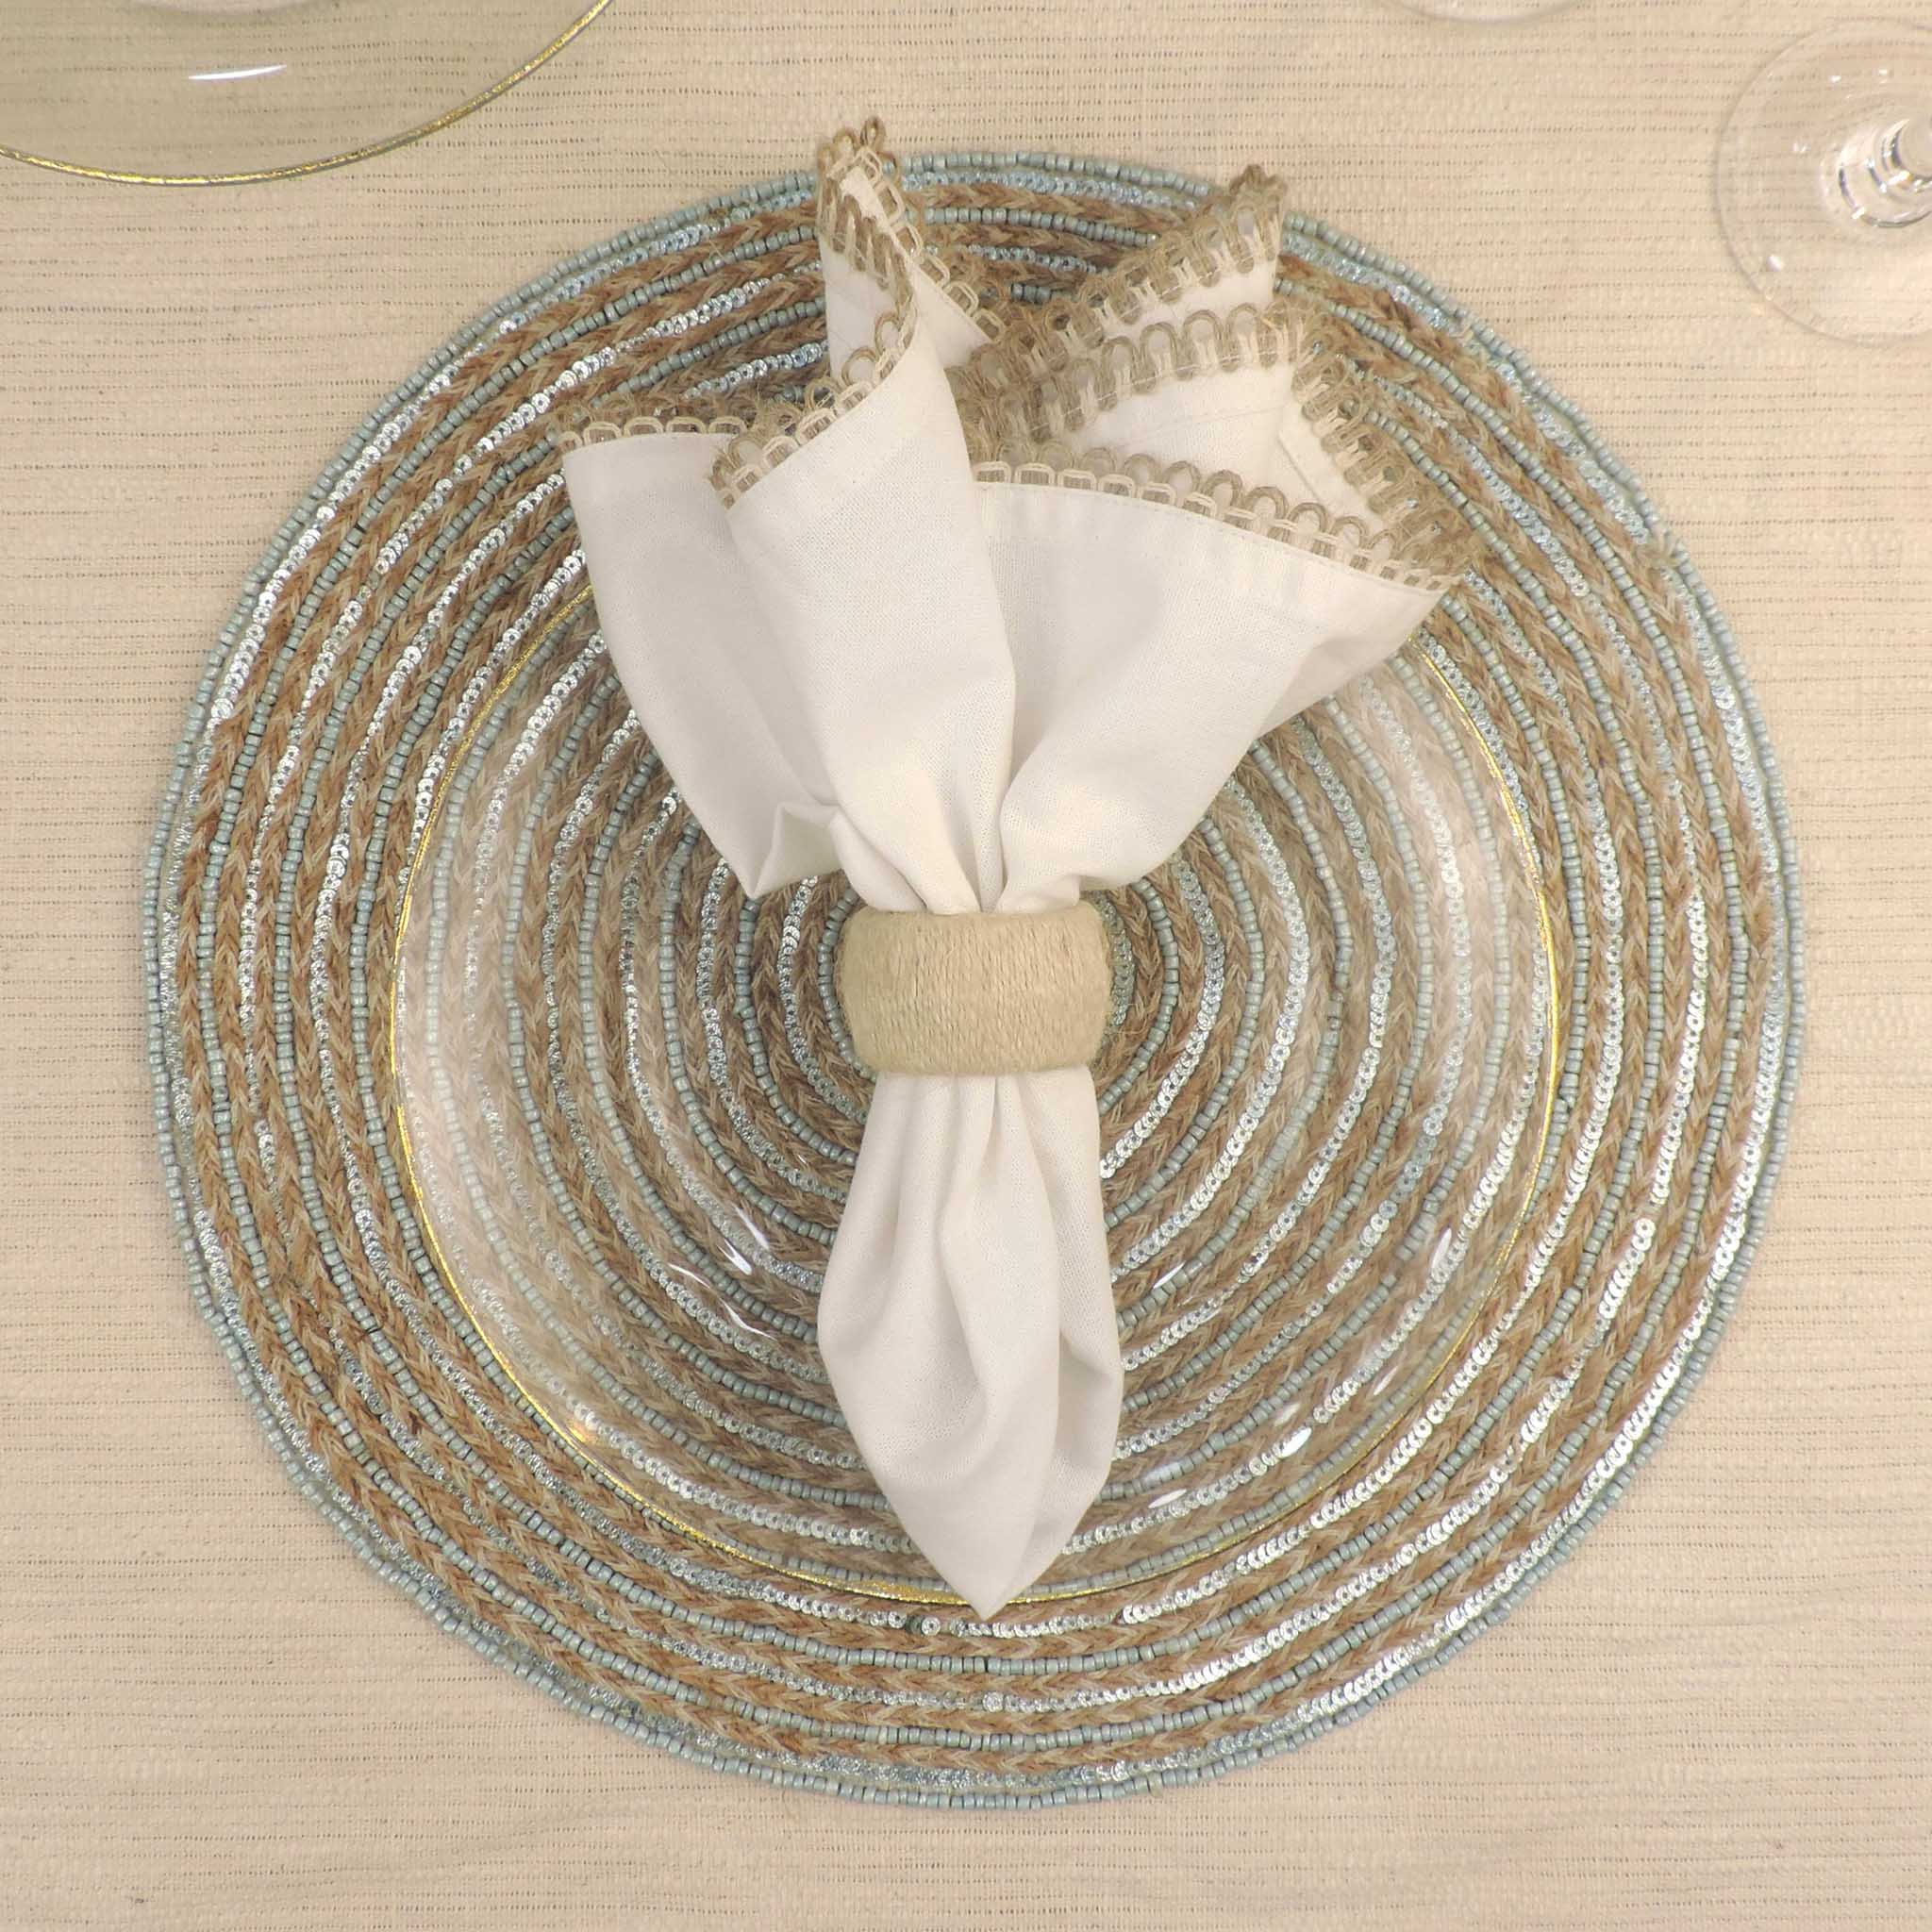 Jute Embroidered Placemat in Teal & Natural, Set of 2/4